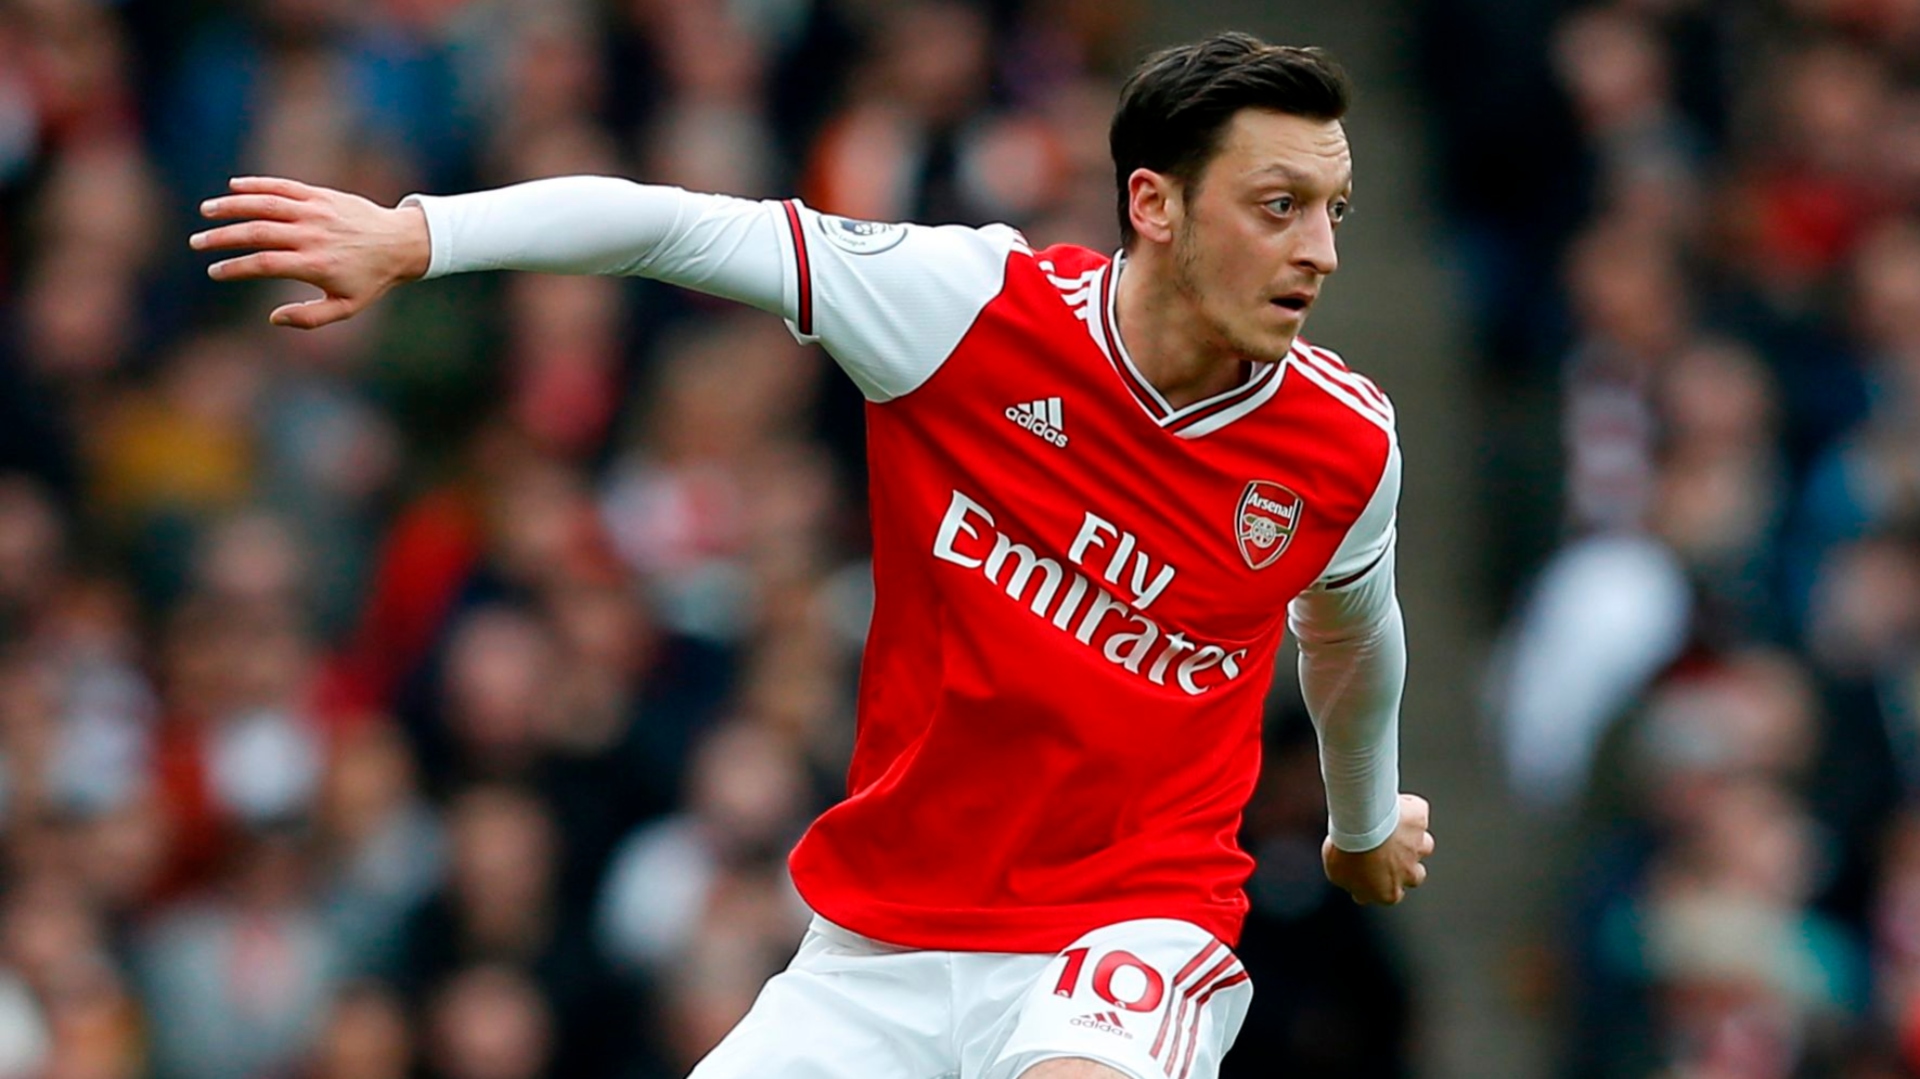 ‘Ozil doesn't have the best discipline’ - Wenger details how to get the best out of Arsenal outcast